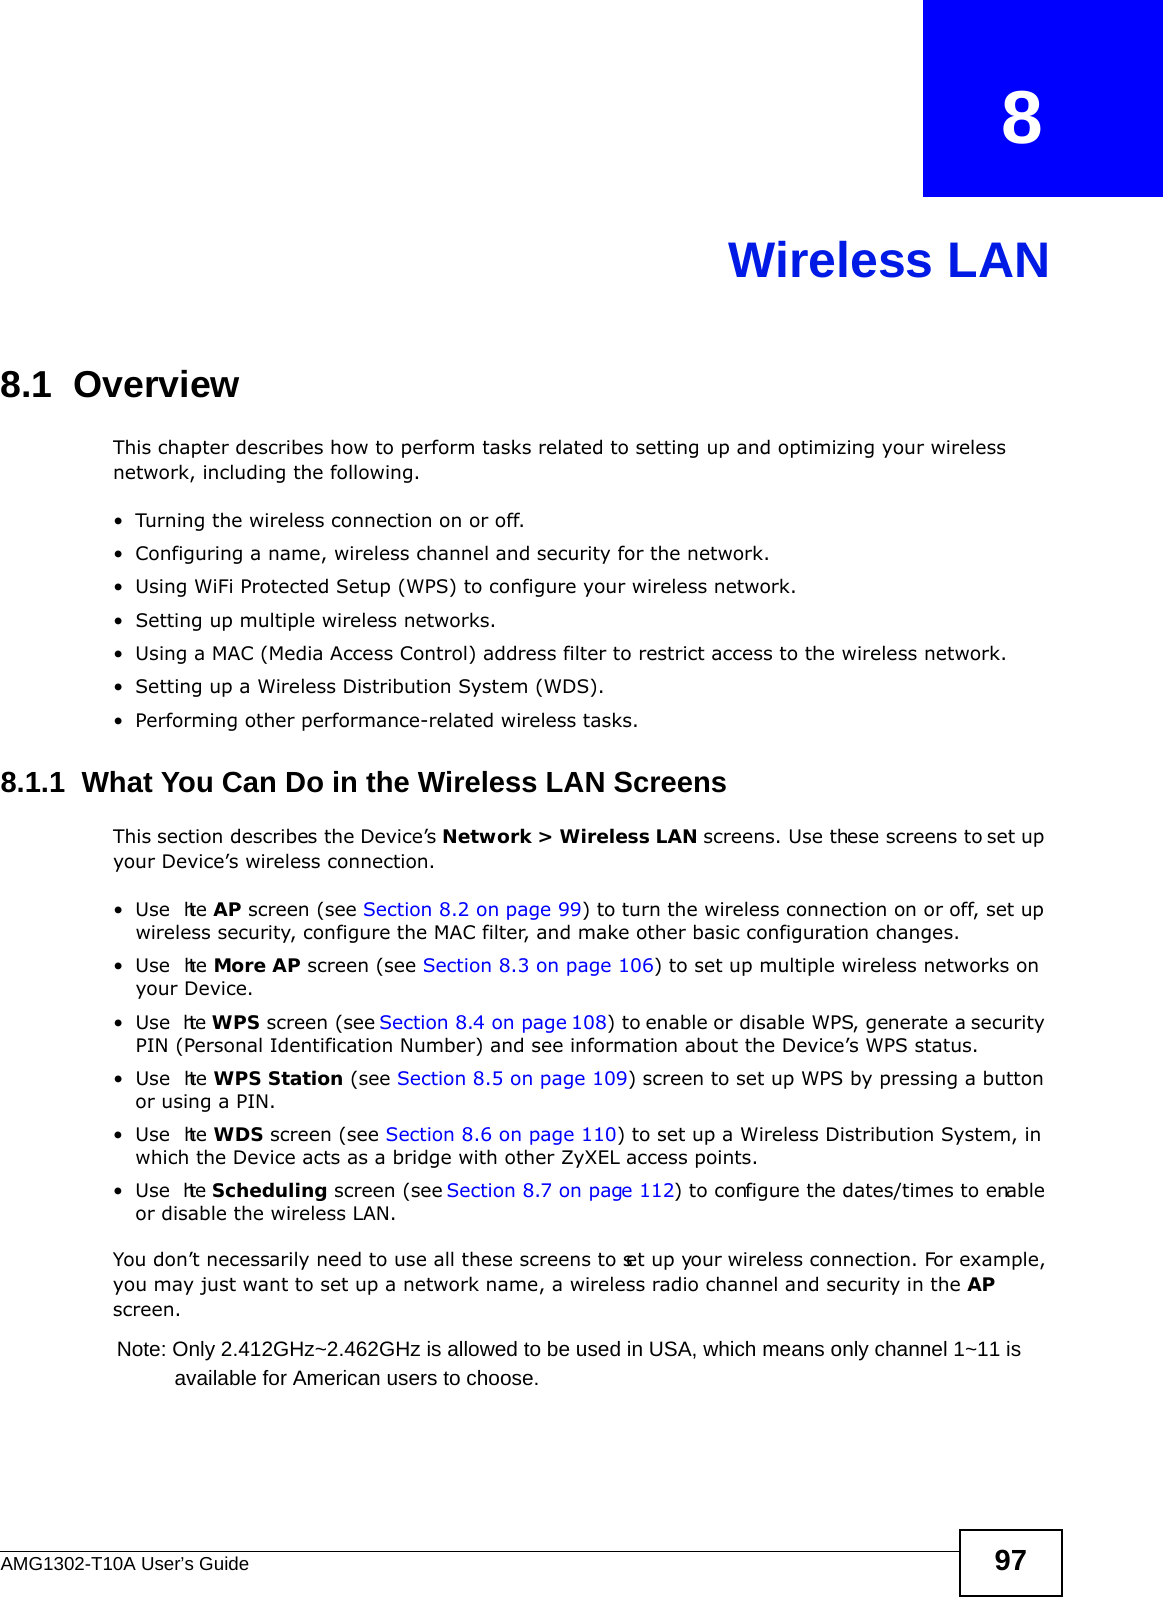 AMG1302-T10A User’s Guide 97CHAPTER   8Wireless LAN8.1  Overview This chapter describes how to perform tasks related to setting up and optimizing your wireless network, including the following.• Turning the wireless connection on or off.• Configuring a name, wireless channel and security for the network.• Using WiFi Protected Setup (WPS) to configure your wireless network.• Setting up multiple wireless networks.• Using a MAC (Media Access Control) address filter to restrict access to the wireless network.• Setting up a Wireless Distribution System (WDS).• Performing other performance-related wireless tasks.8.1.1  What You Can Do in the Wireless LAN ScreensThis section describes the Device’s Network &gt; Wireless LAN screens. Use these screens to set up your Device’s wireless connection.•Use  the AP screen (see Section 8.2 on page 99) to turn the wireless connection on or off, set up wireless security, configure the MAC filter, and make other basic configuration changes.•Use  the More AP screen (see Section 8.3 on page 106) to set up multiple wireless networks on your Device.•Use  the WPS screen (see Section 8.4 on page 108) to enable or disable WPS, generate a security PIN (Personal Identification Number) and see information about the Device’s WPS status.•Use  the WPS Station (see Section 8.5 on page 109) screen to set up WPS by pressing a button or using a PIN.•Use  the WDS screen (see Section 8.6 on page 110) to set up a Wireless Distribution System, in which the Device acts as a bridge with other ZyXEL access points.•Use  the Scheduling screen (see Section 8.7 on page 112) to configure the dates/times to enable or disable the wireless LAN.You don’t necessarily need to use all these screens to set up your wireless connection. For example, you may just want to set up a network name, a wireless radio channel and security in the AP screen.Note: Only 2.412GHz~2.462GHz is allowed to be used in USA, which means only channel 1~11 is           available for American users to choose.